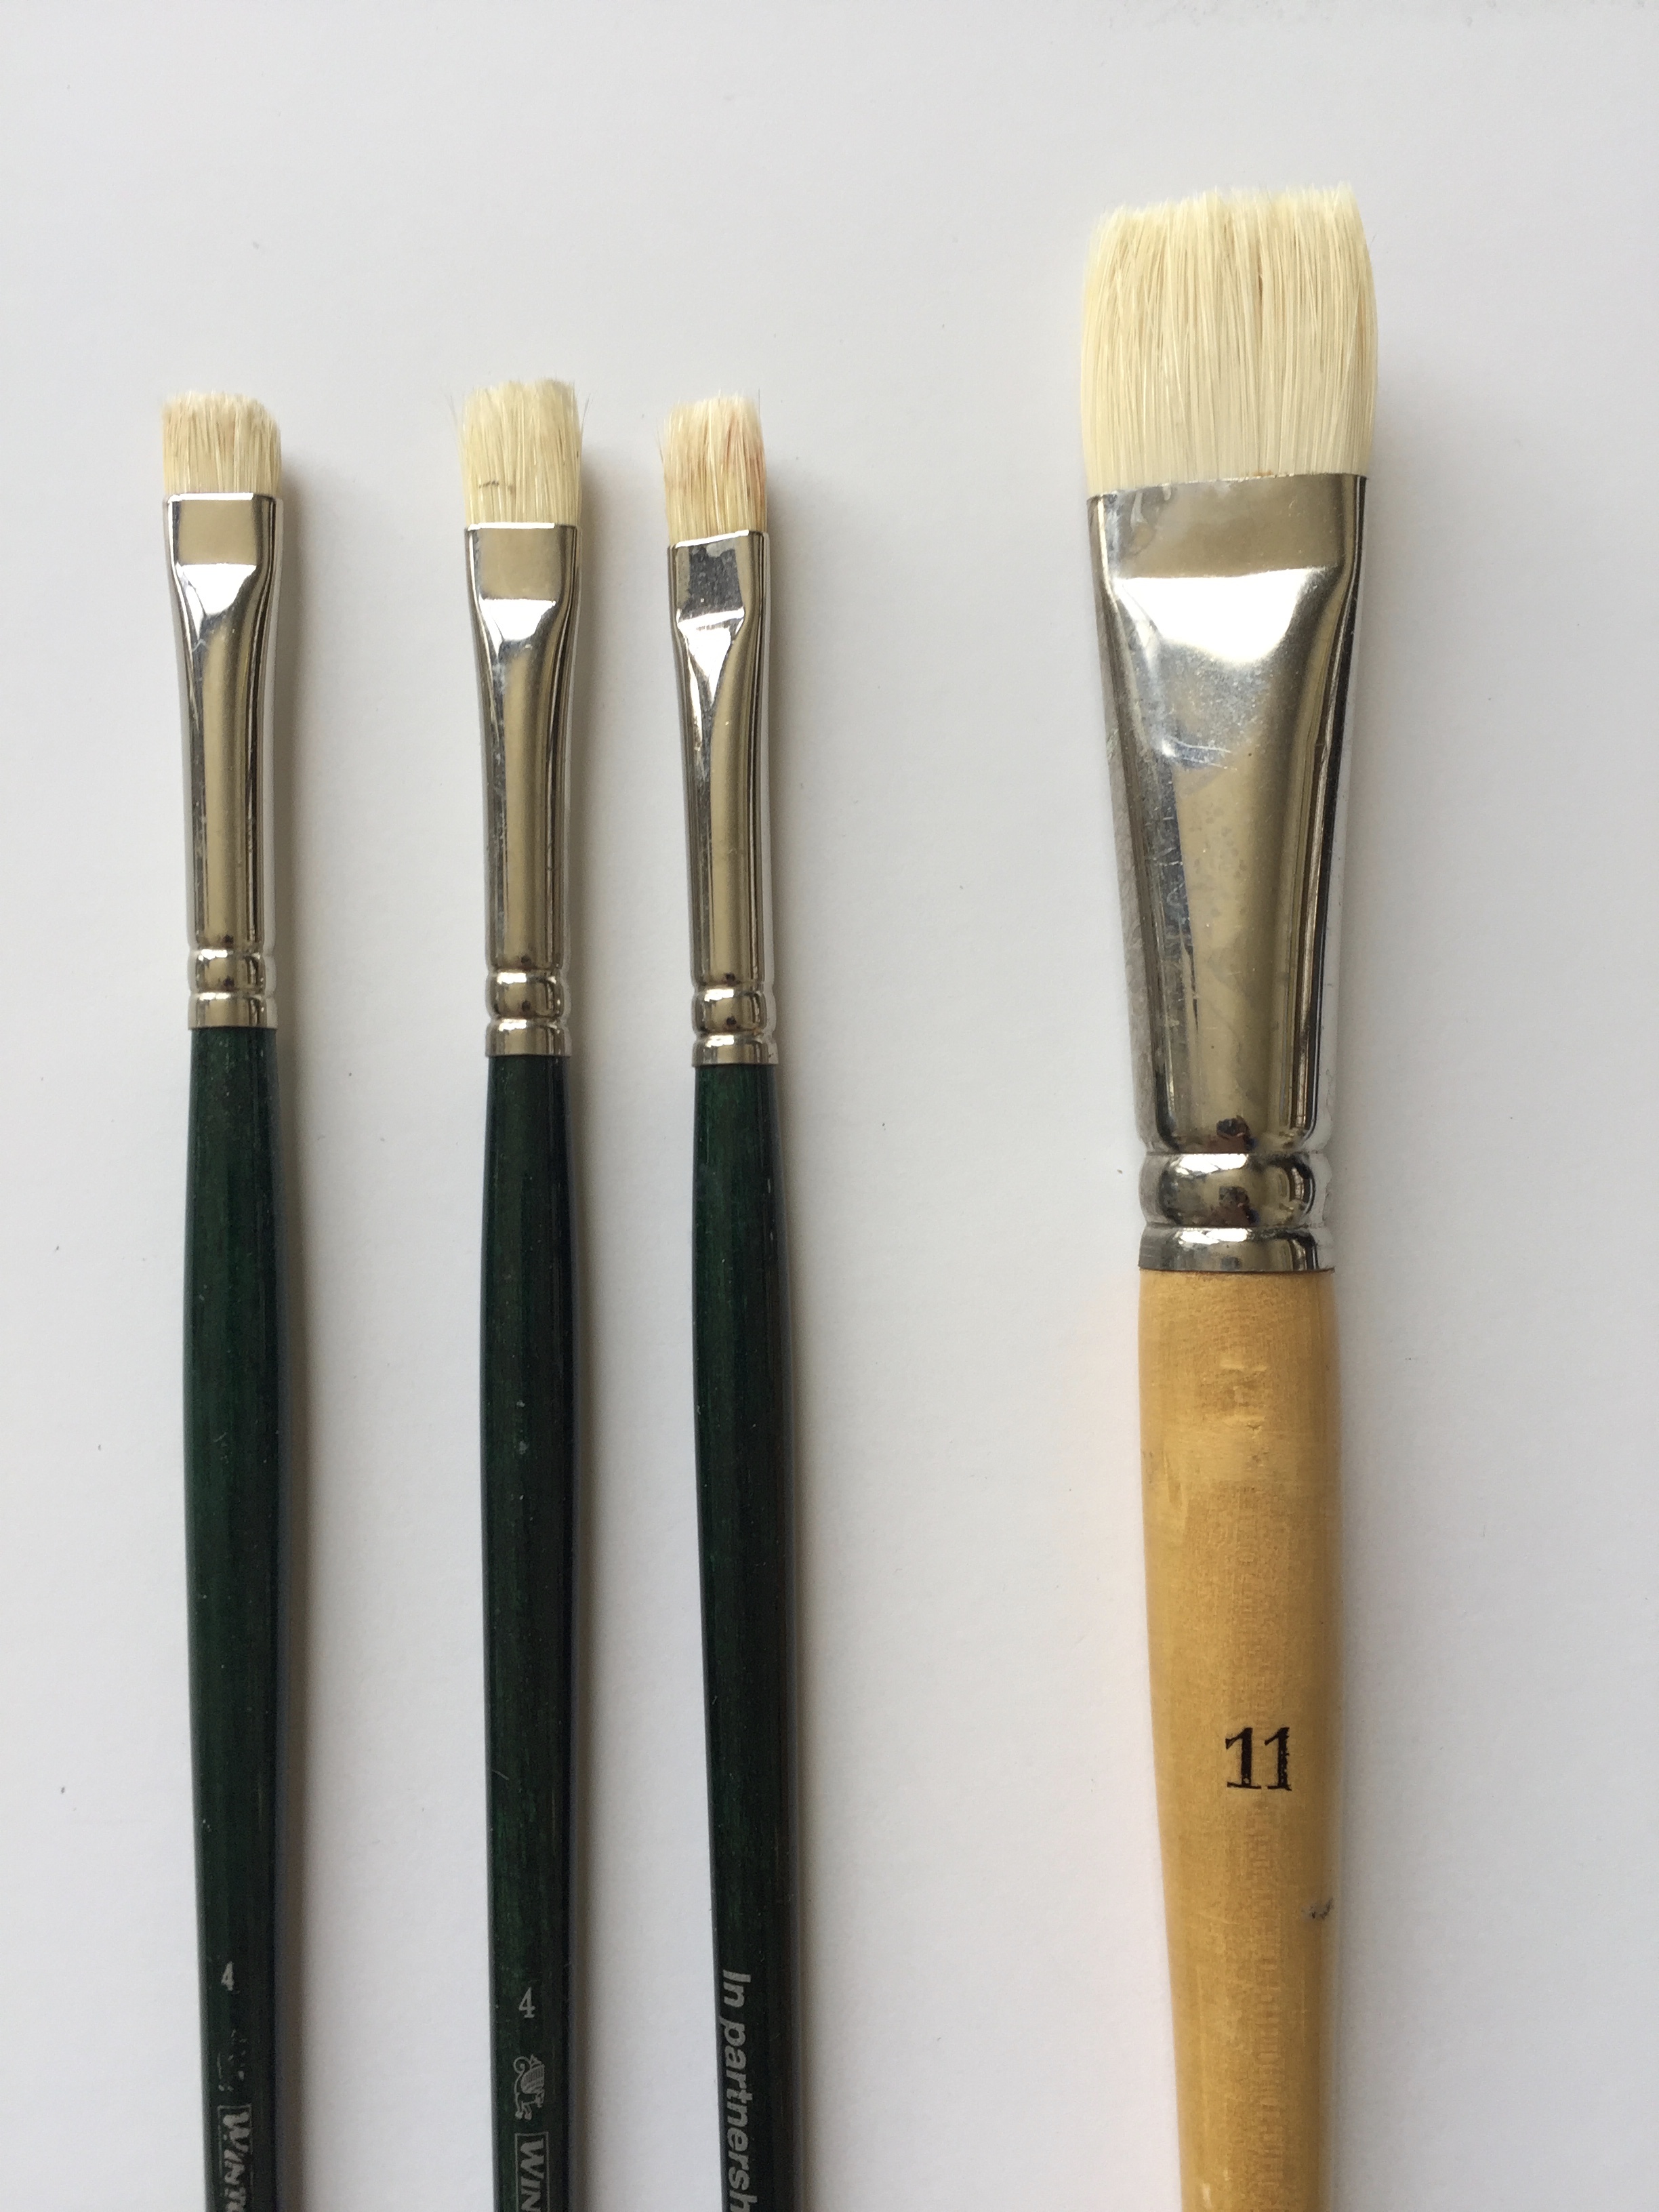 Guide for types of paintbrushes for oil painting from natural or